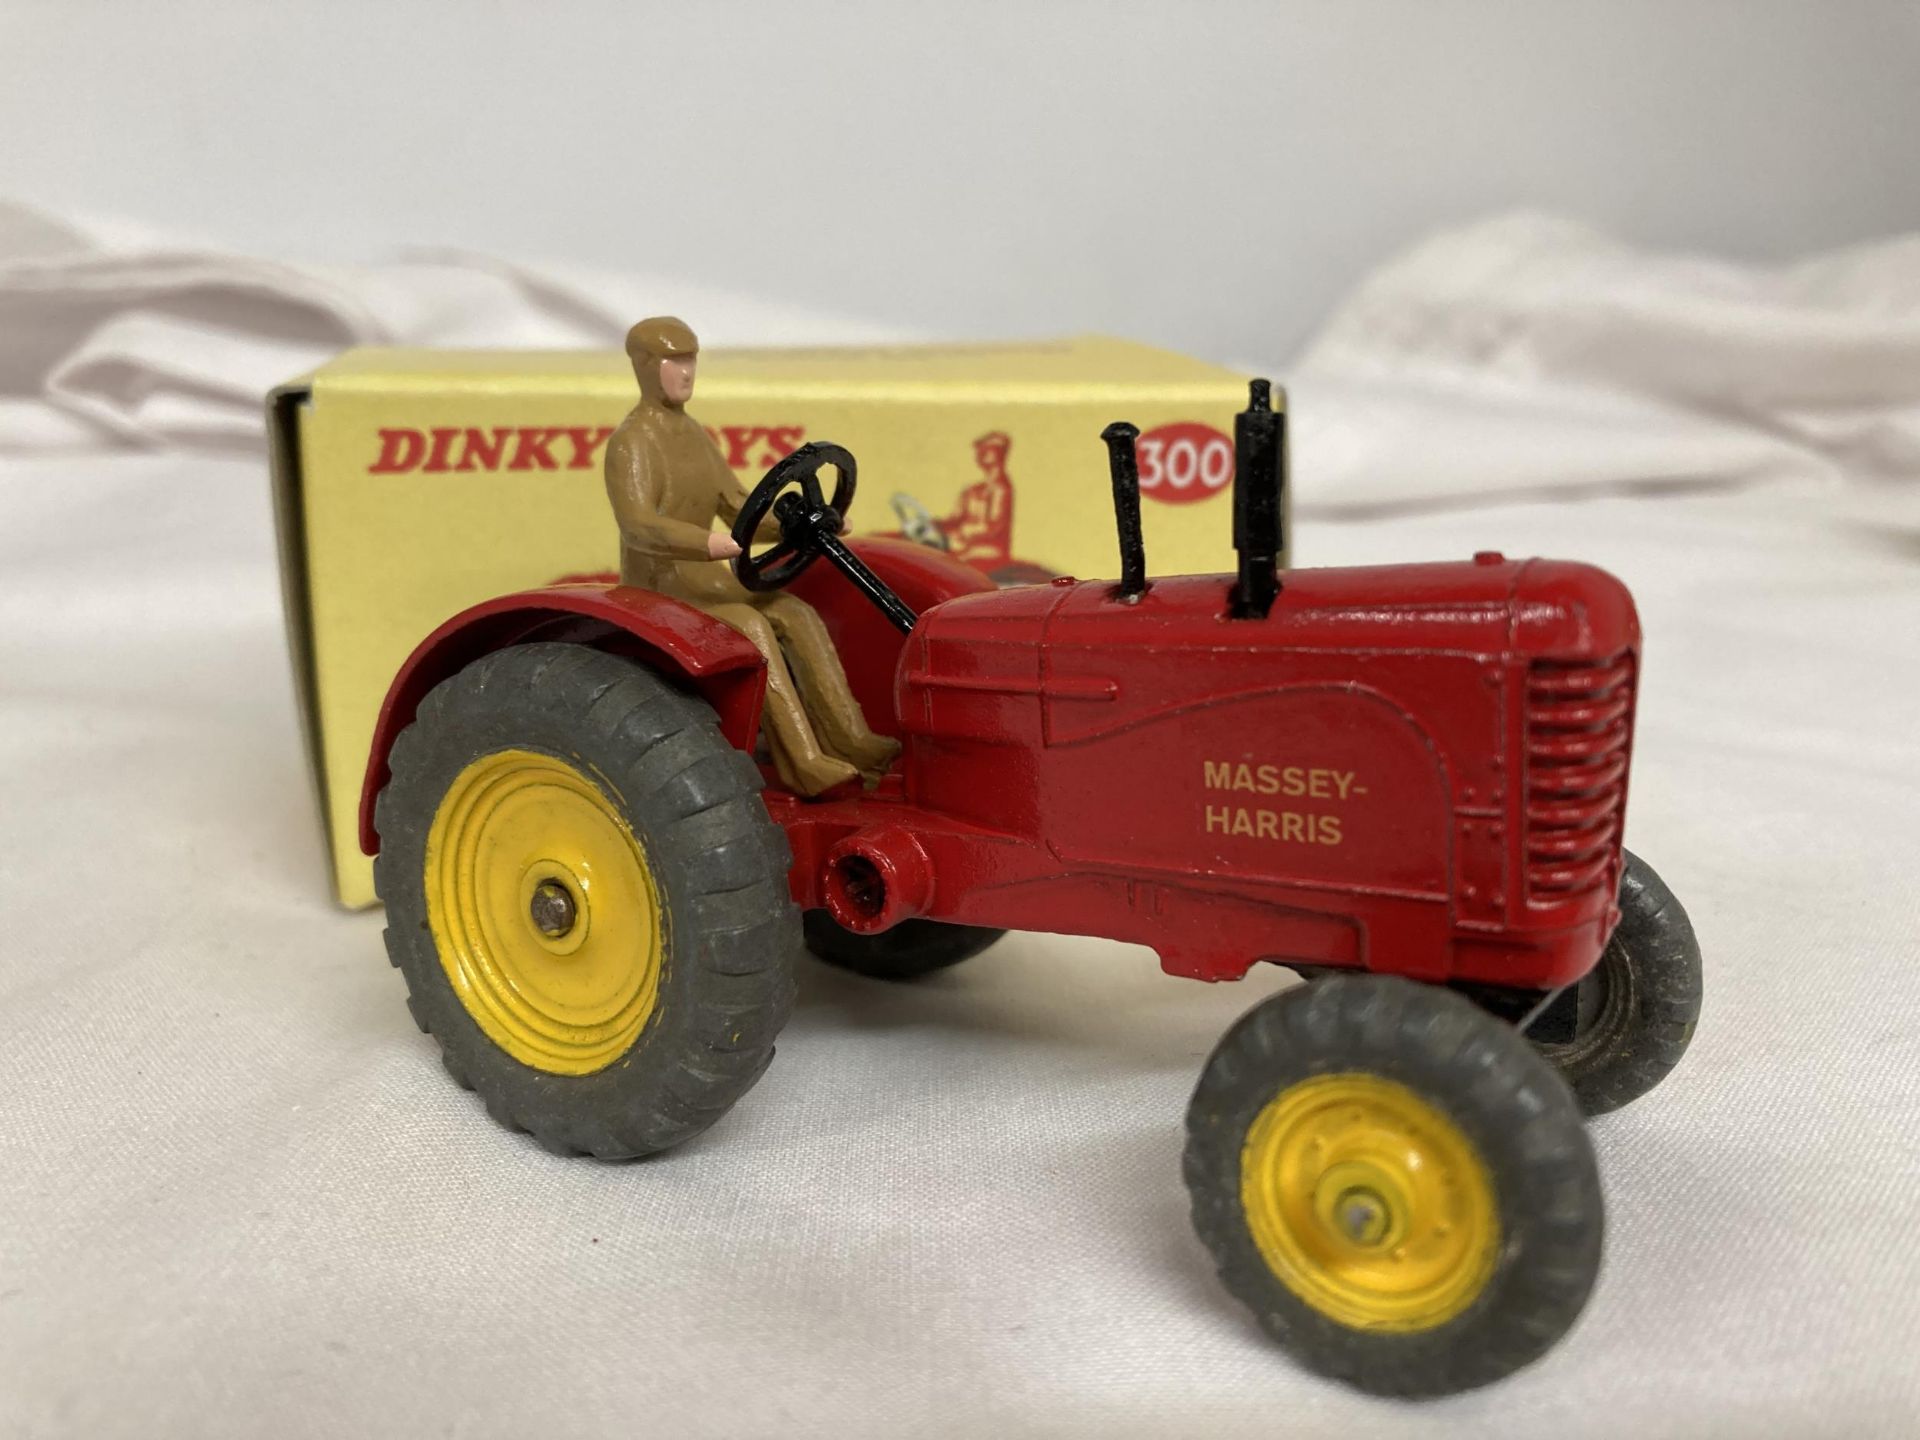 TWO BOXED DINKY MODELS NO. 300 - A MASSEY HARRIS TRACTOR AND NO. 321 - A MASSEY HARRIS MANURE - Bild 2 aus 3